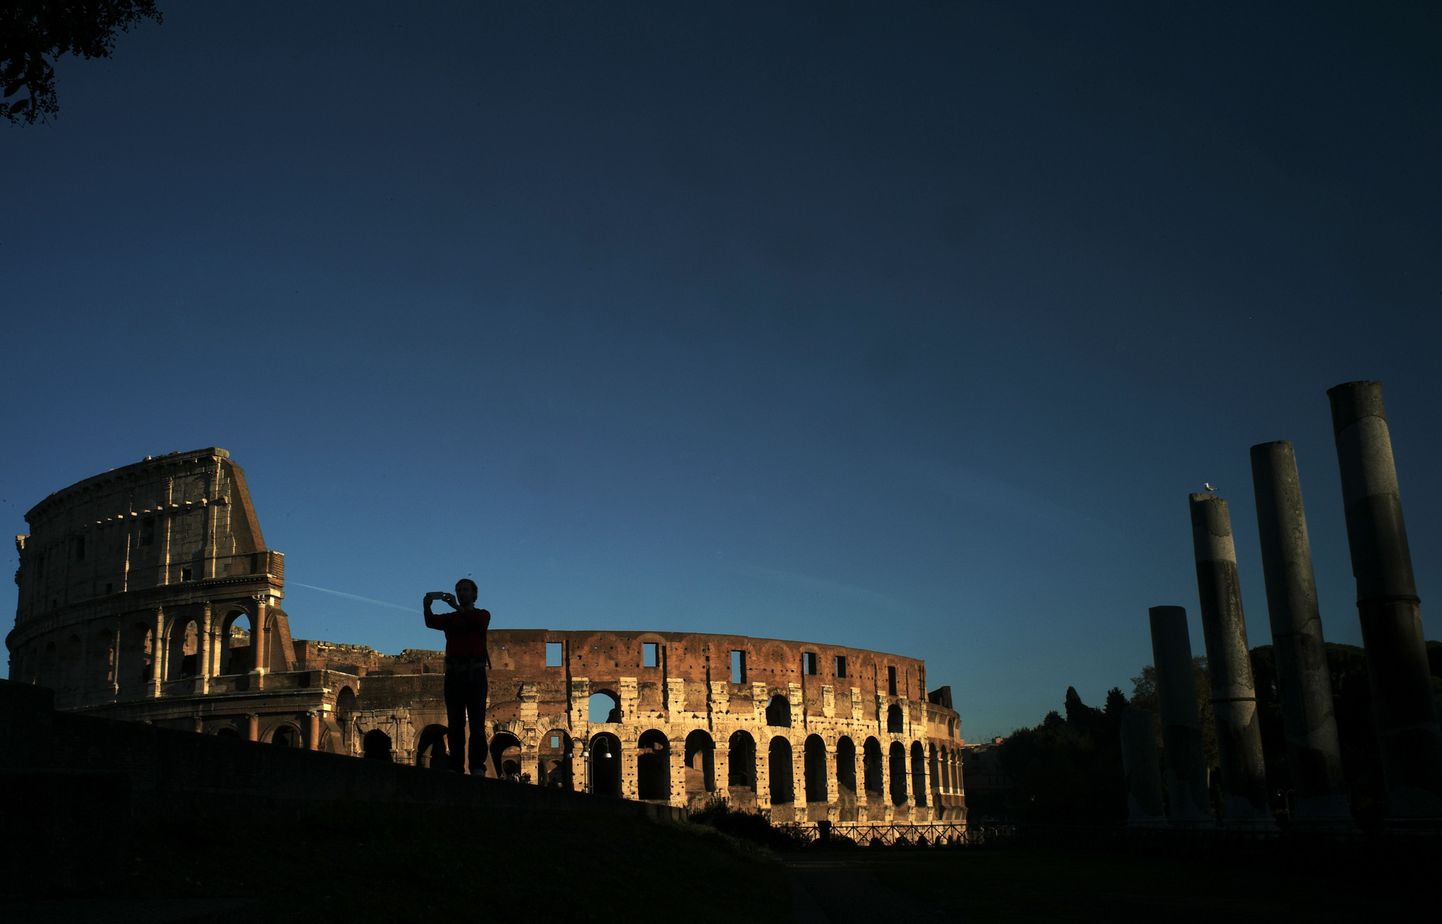 A man takes pictures near the Colosseum at sunset on November 21, 2014 in Rome.  AFP PHOTO / FILIPPO MONTEFORTE